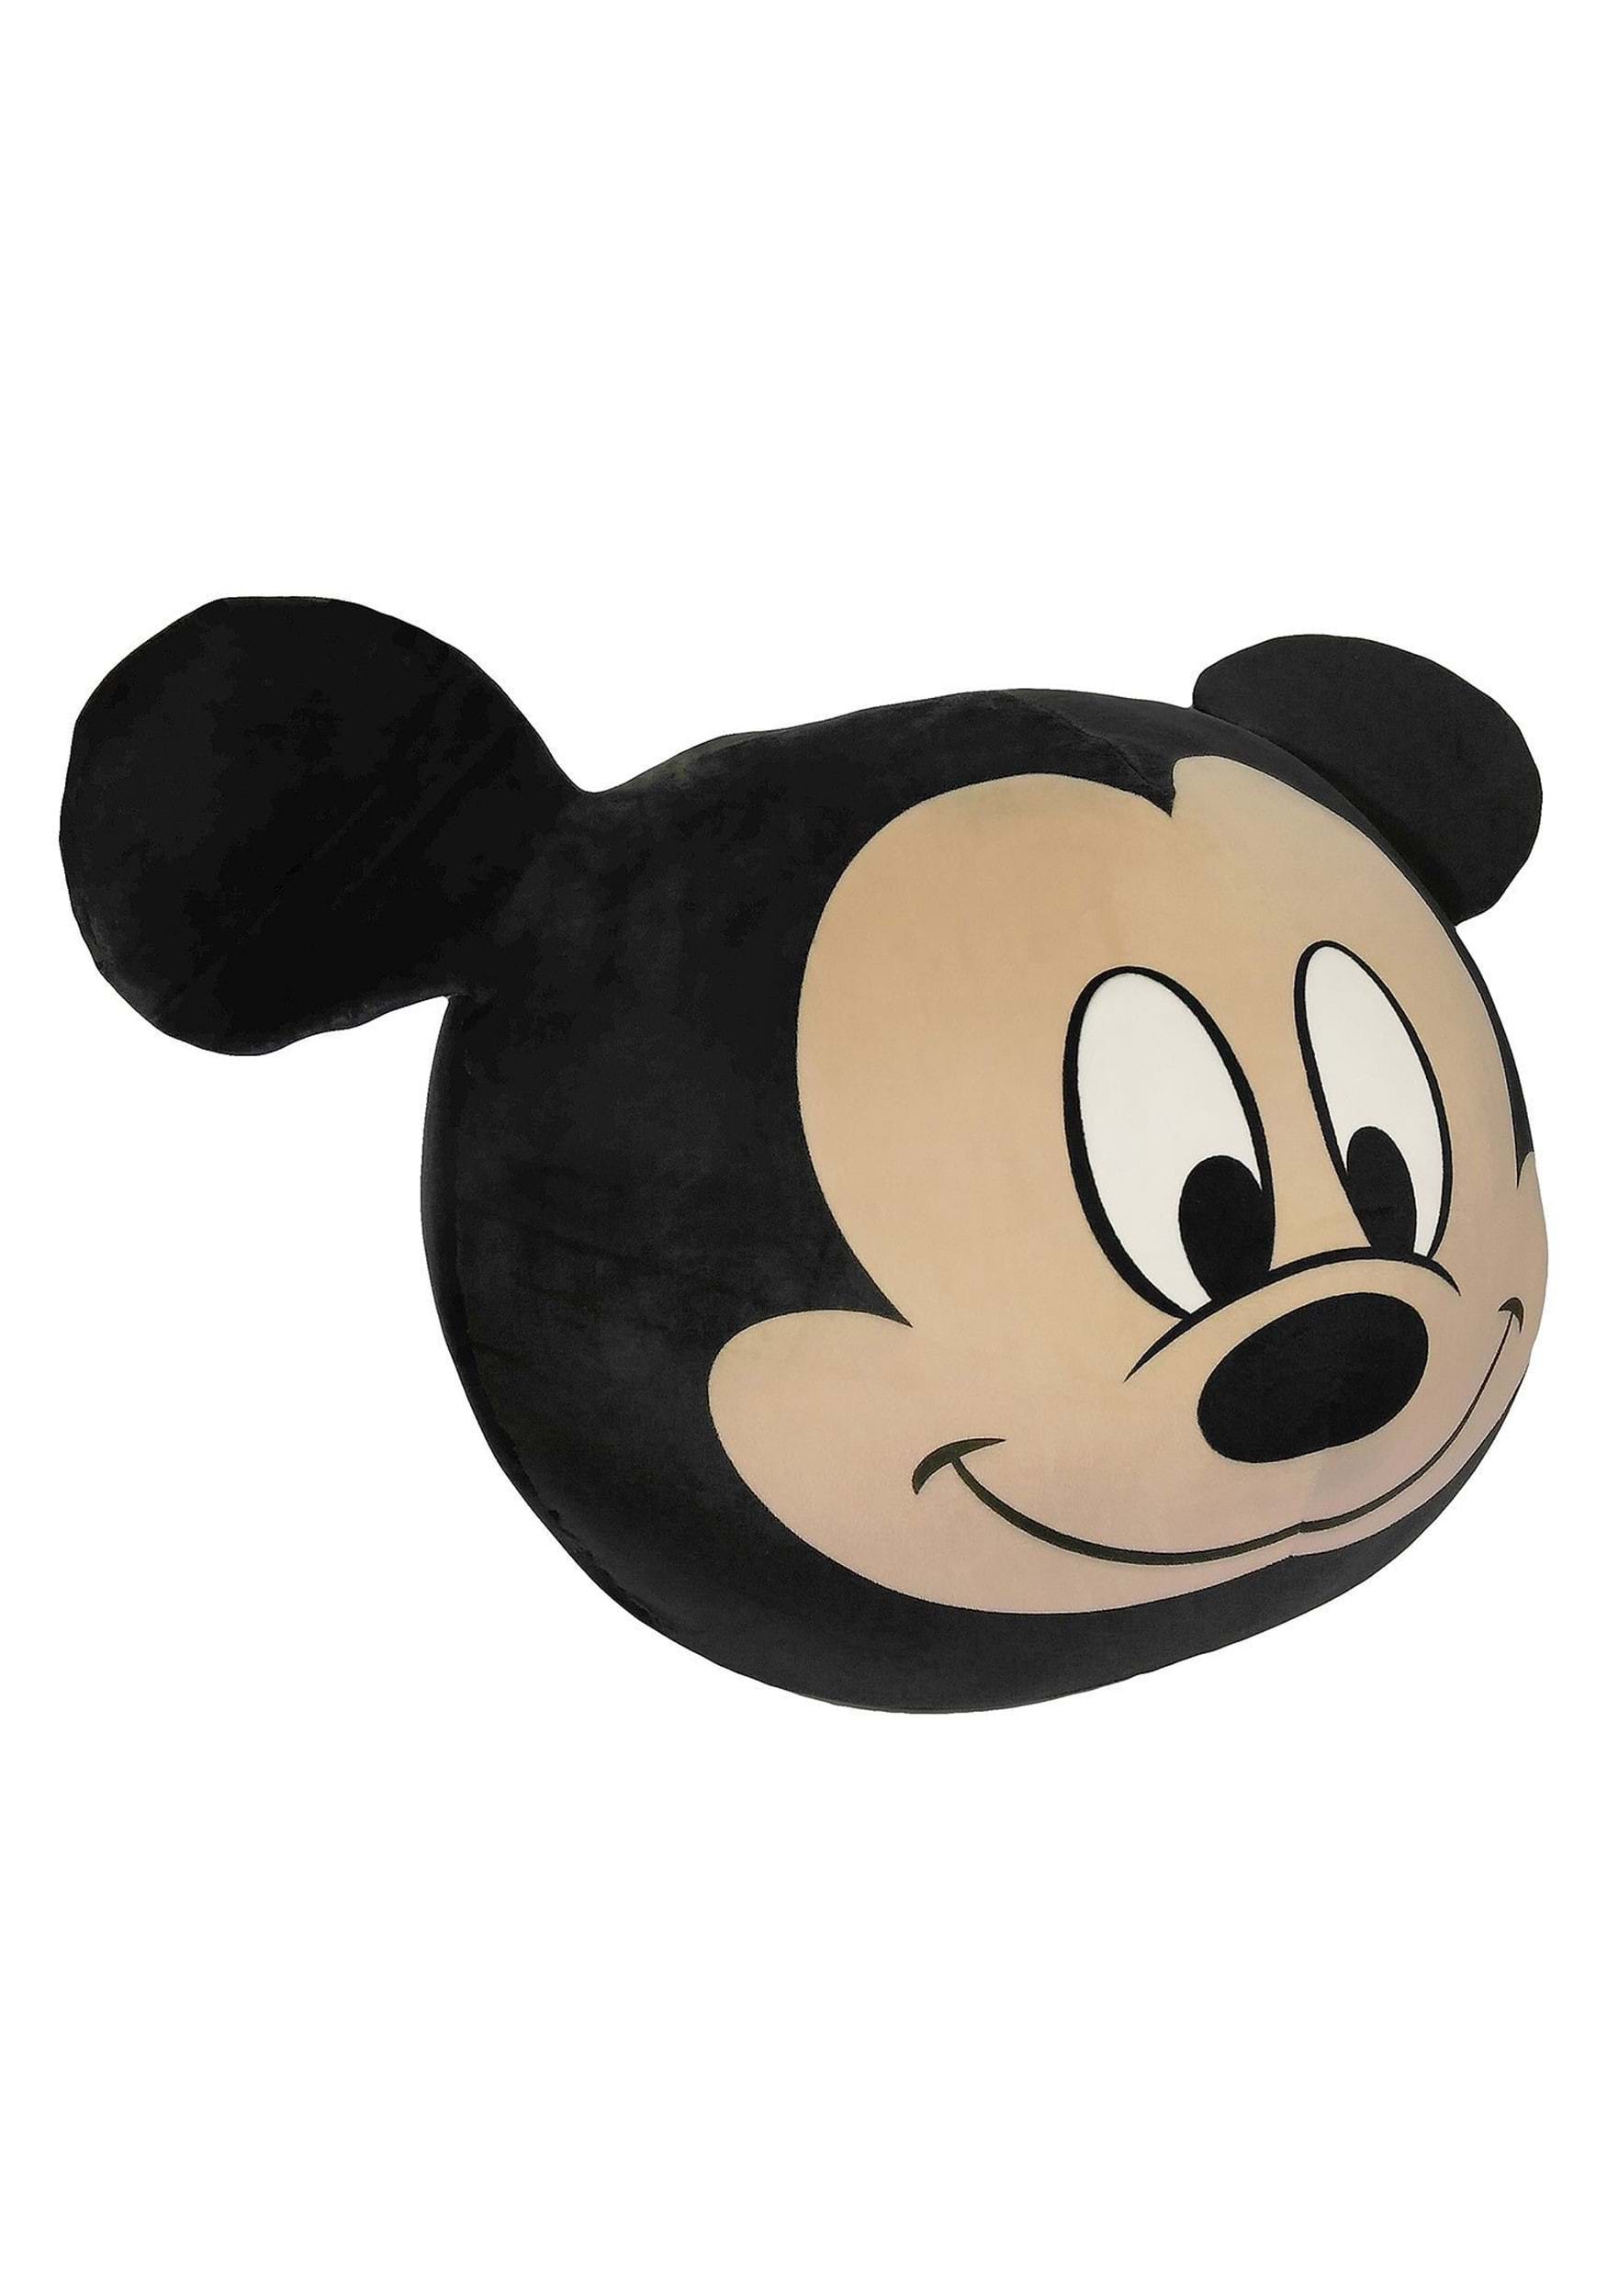 11" Mickey Mouse Cloud Pillow